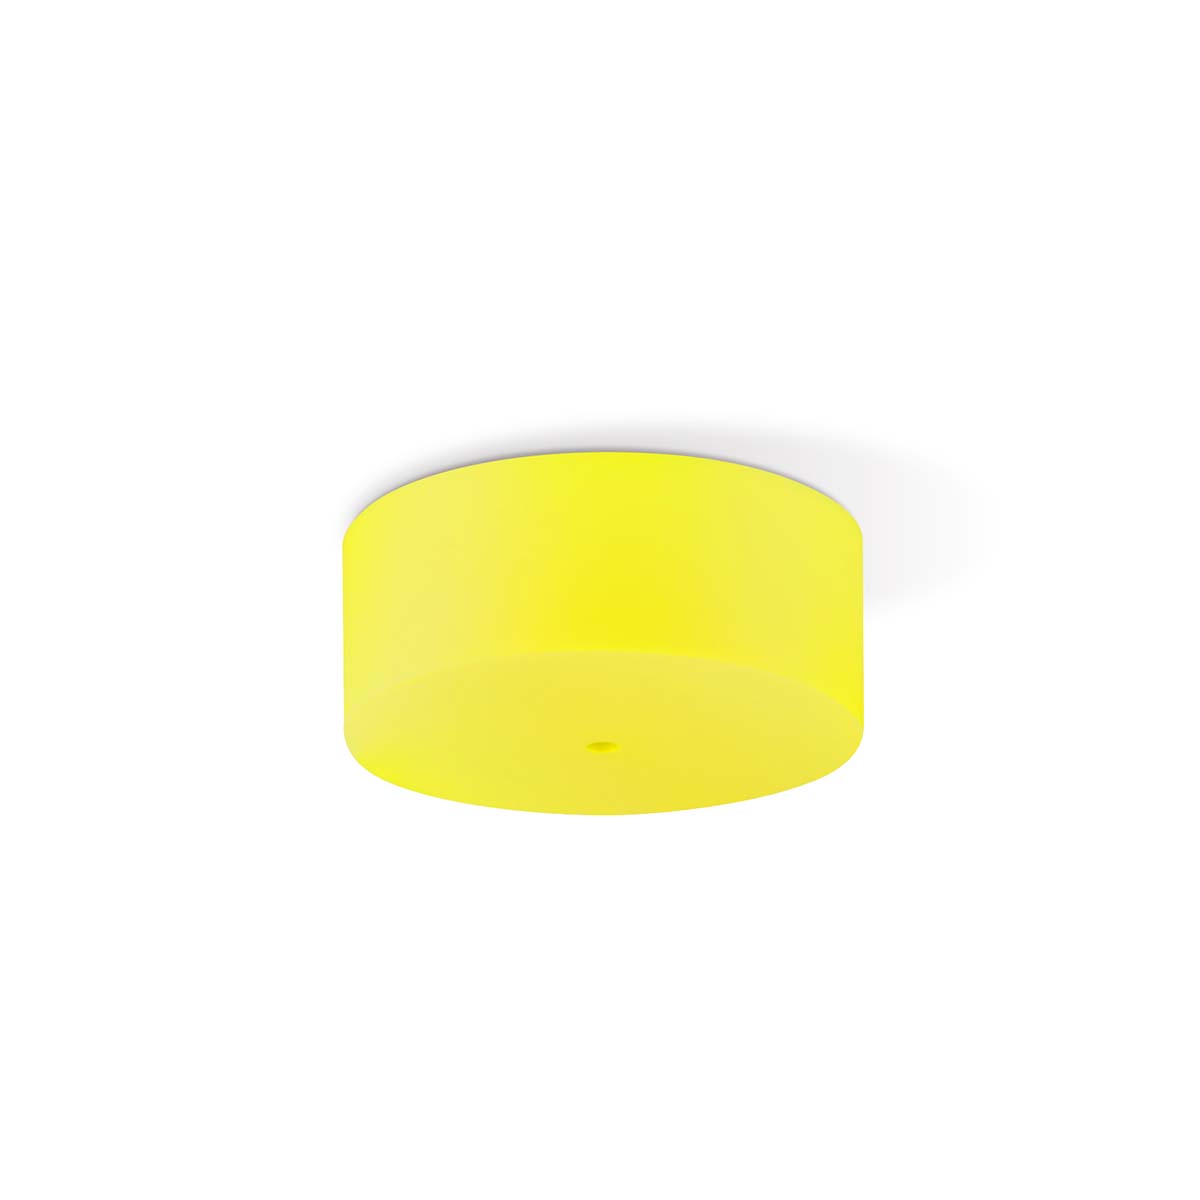 Tangla lighting - TLCP022-01YE - Silicon 1 Light round canopy cylinder - yellow